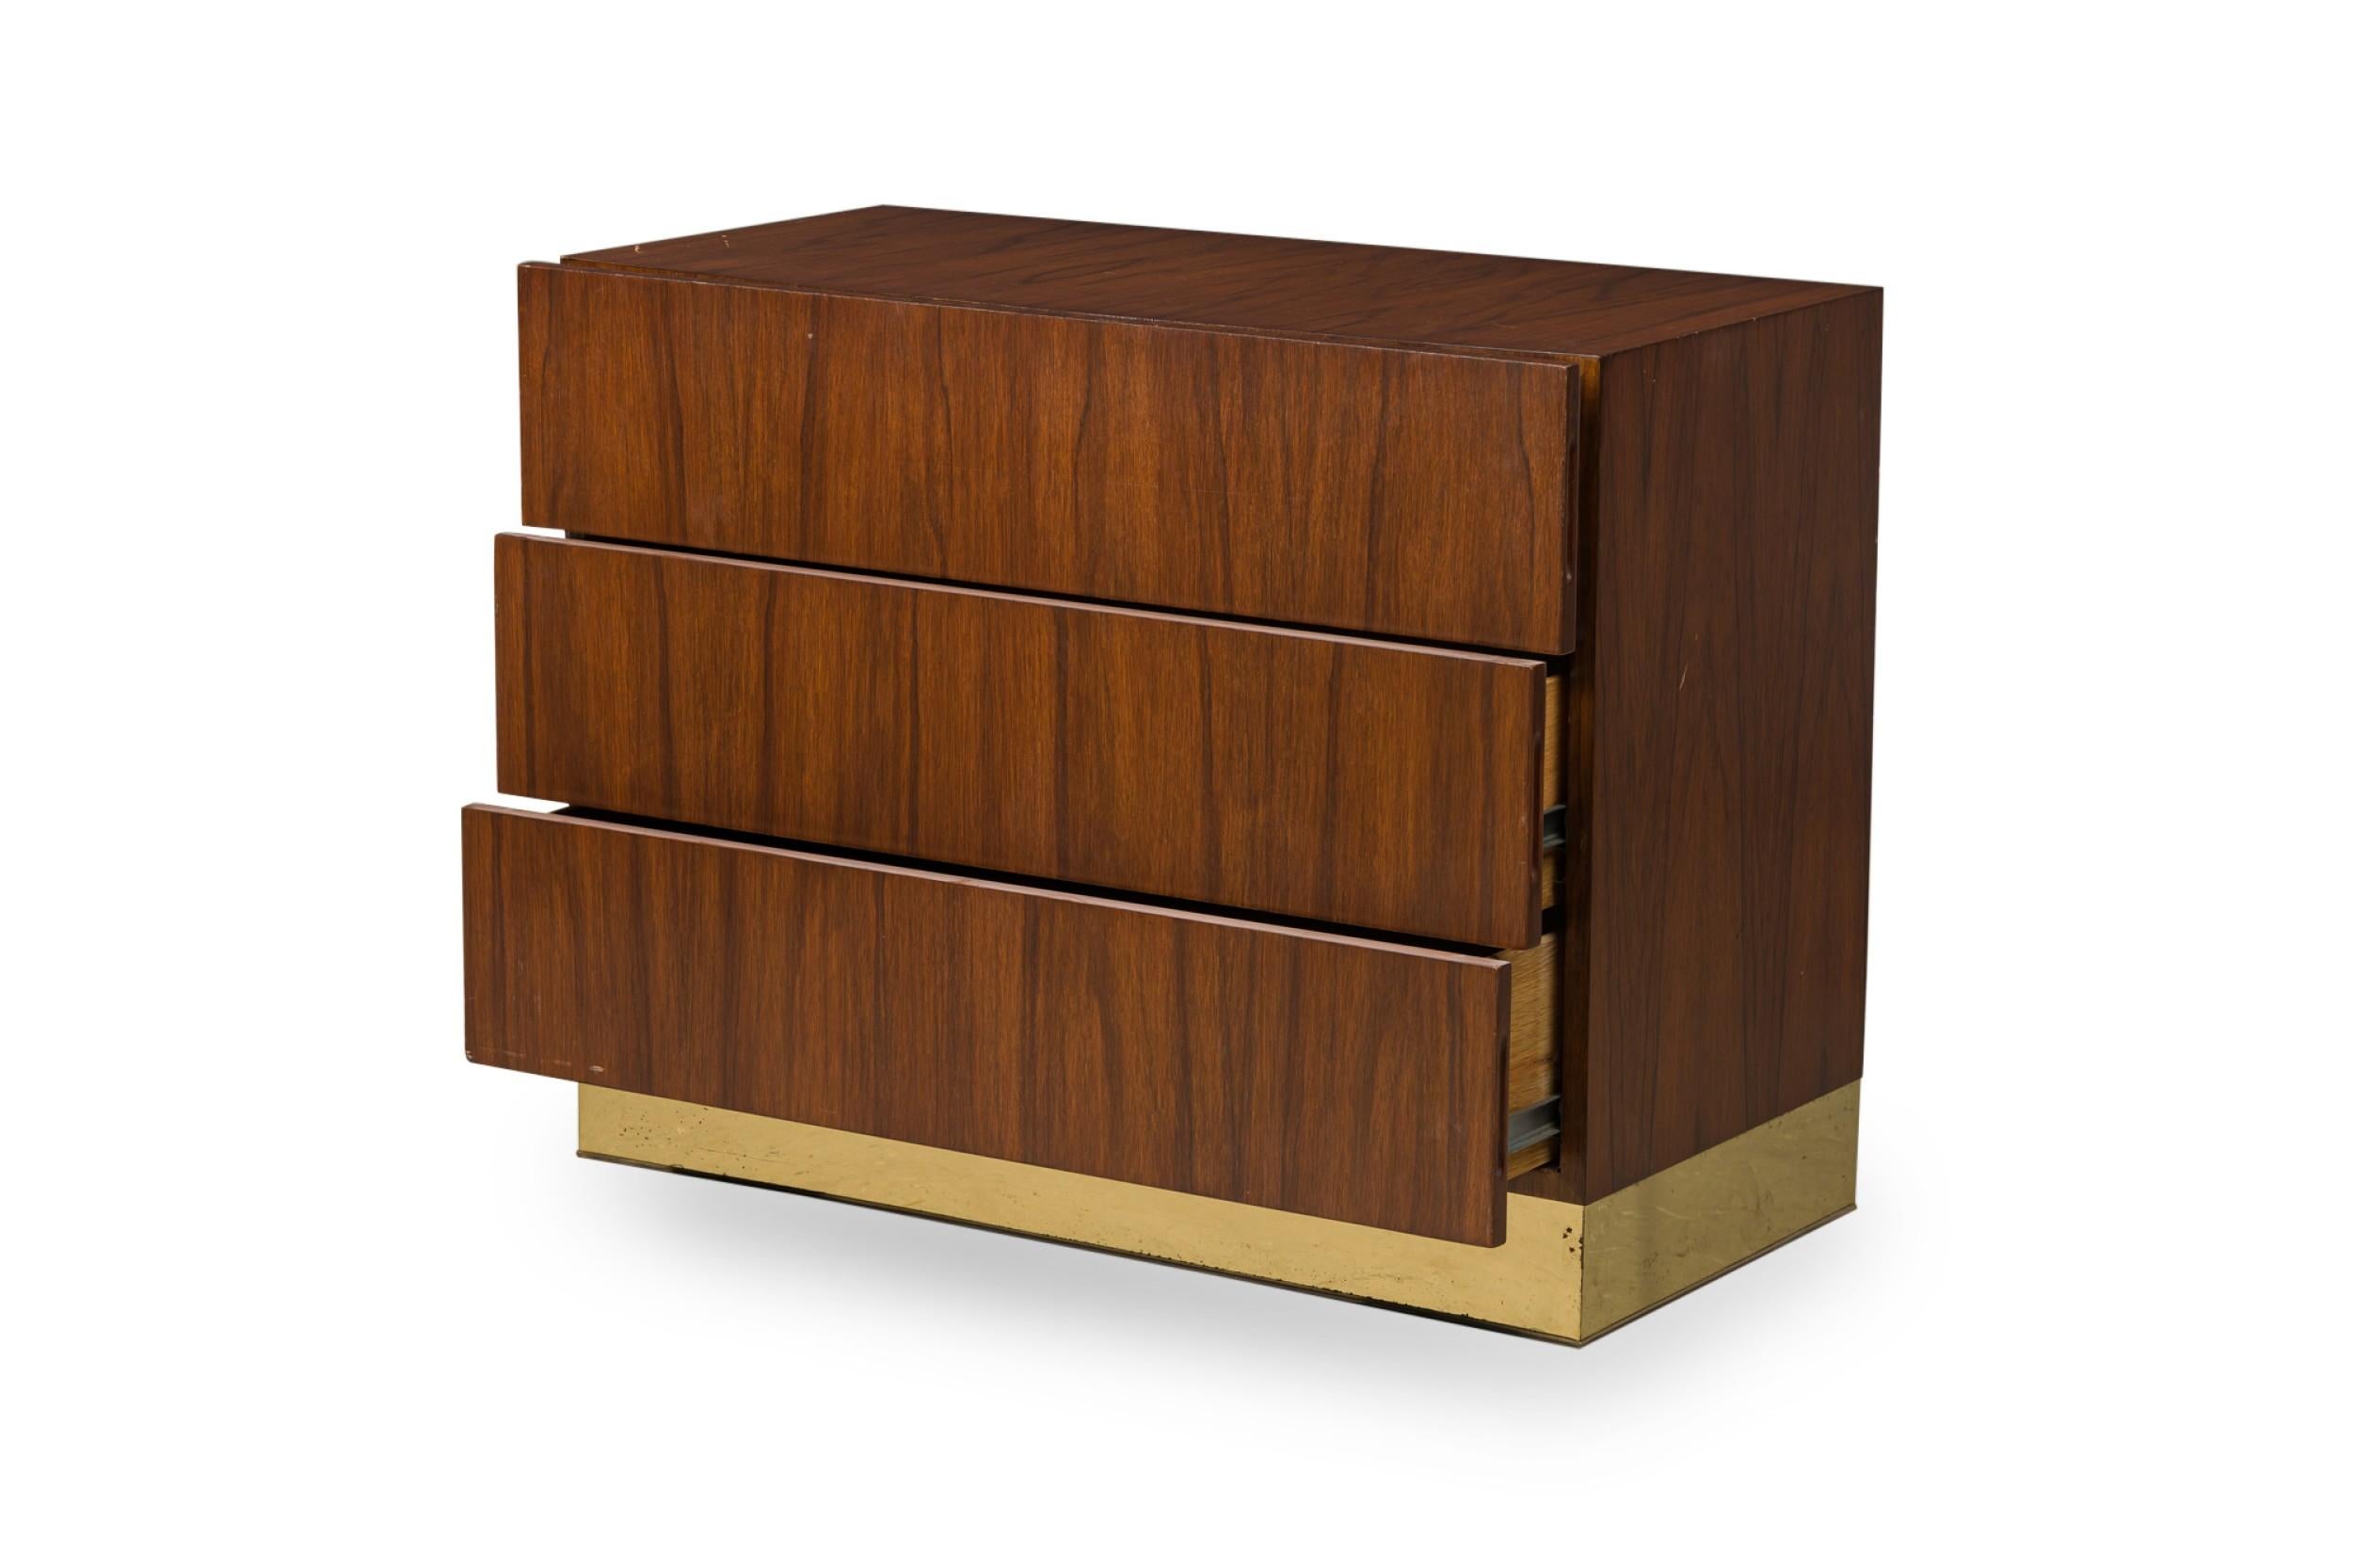 20th Century Milo Baughman American Mid-Century Rosewood and Brass Commode / Chest of Drawers For Sale